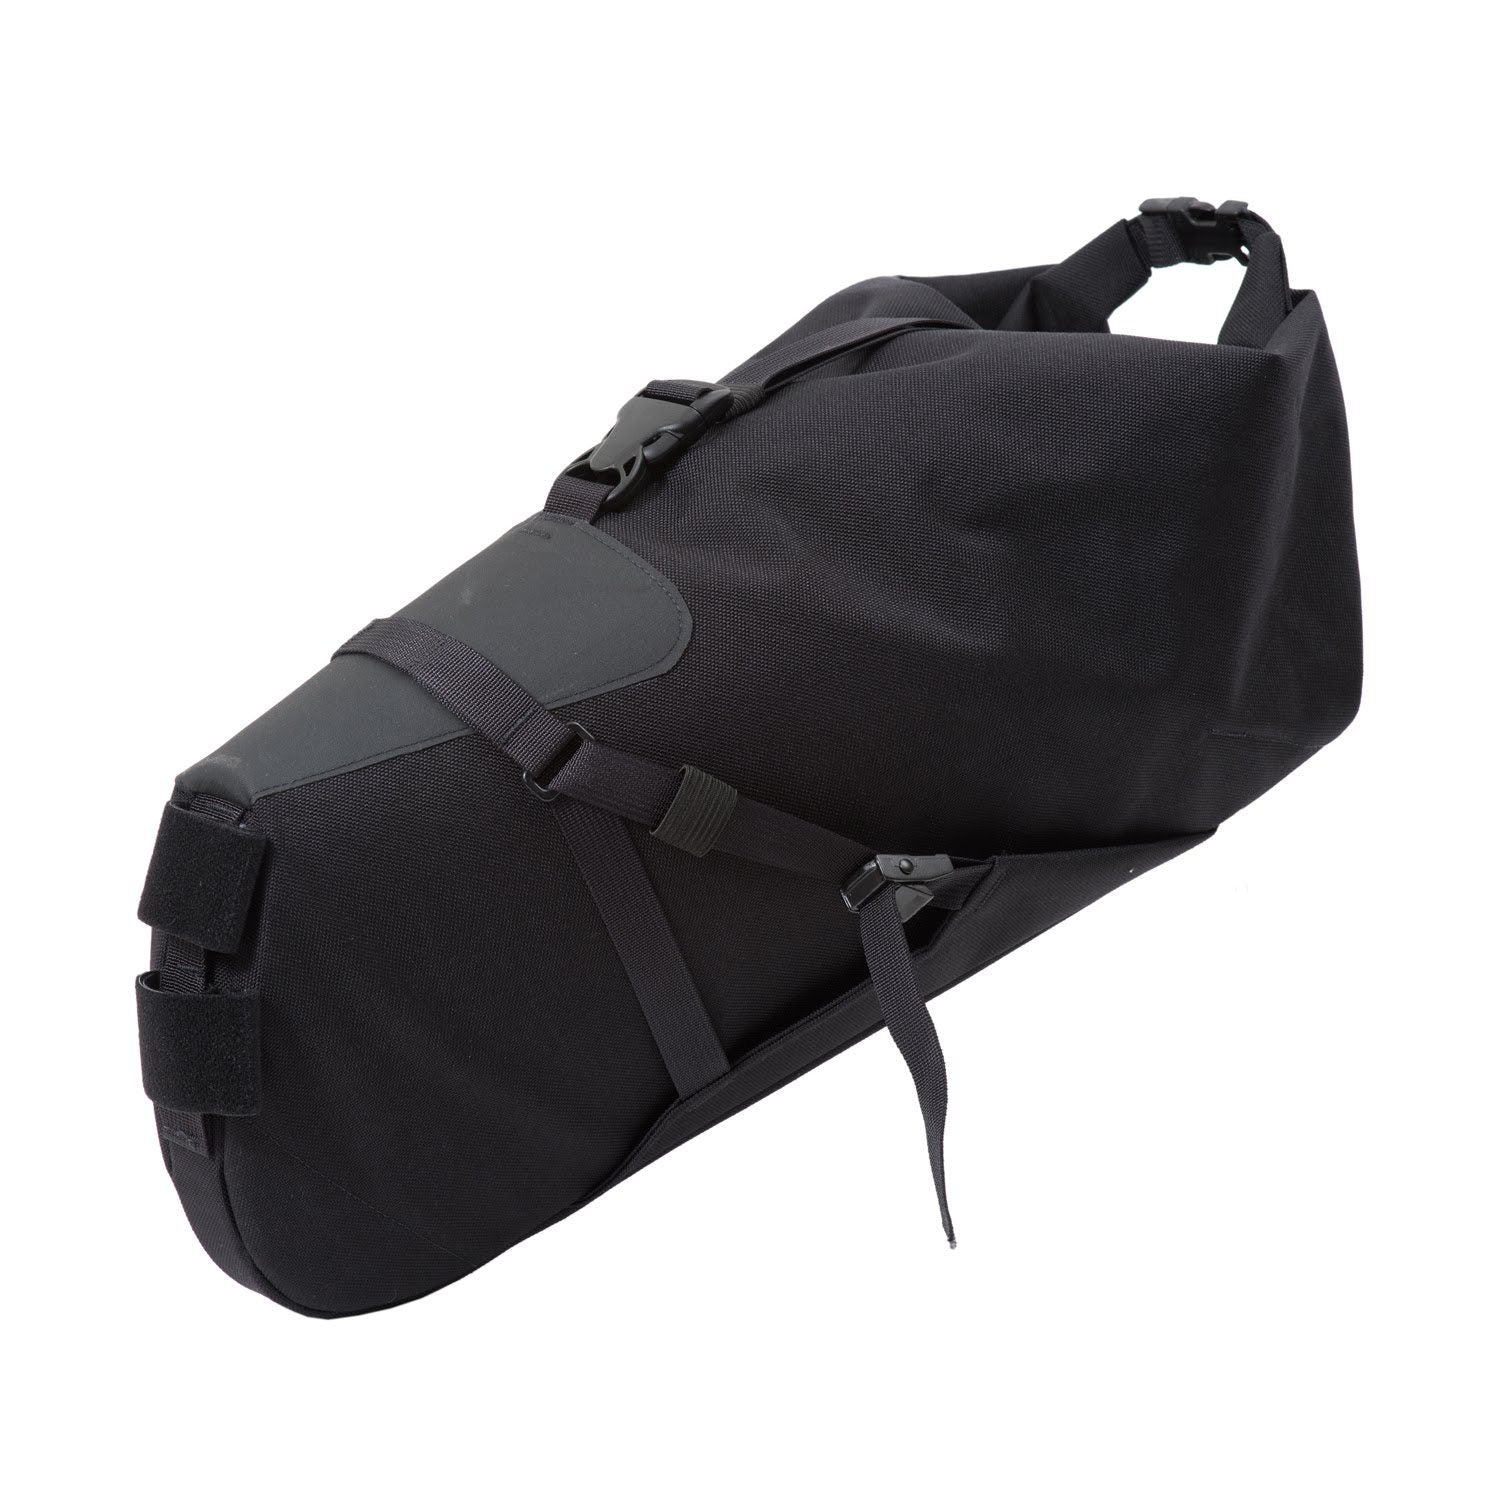 OUTER SHELL ADVENTURE Expedition Seatpack